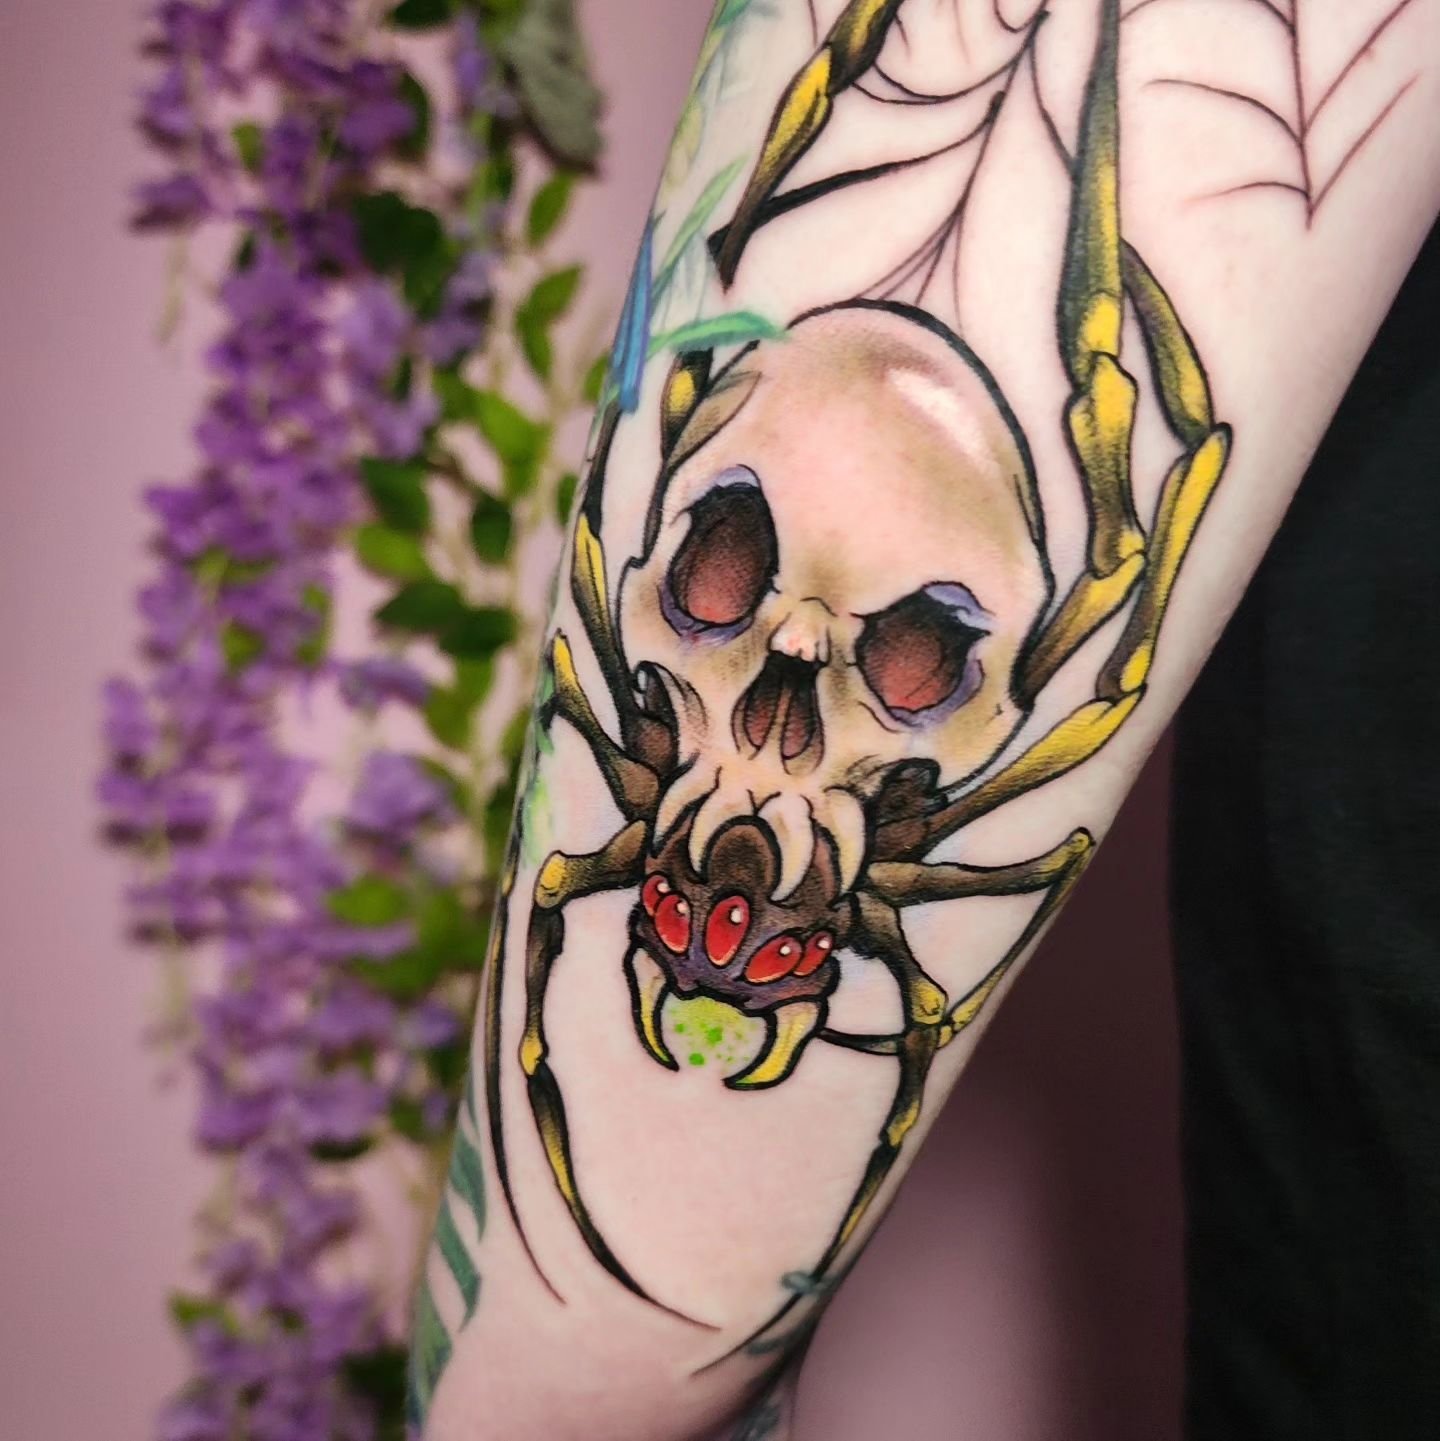 Skulltulla and Elbow Web  for @meg_bot.jpg 
Thanks for the trust and the fun times! 

Made at my save point, @pearlstreettattoo